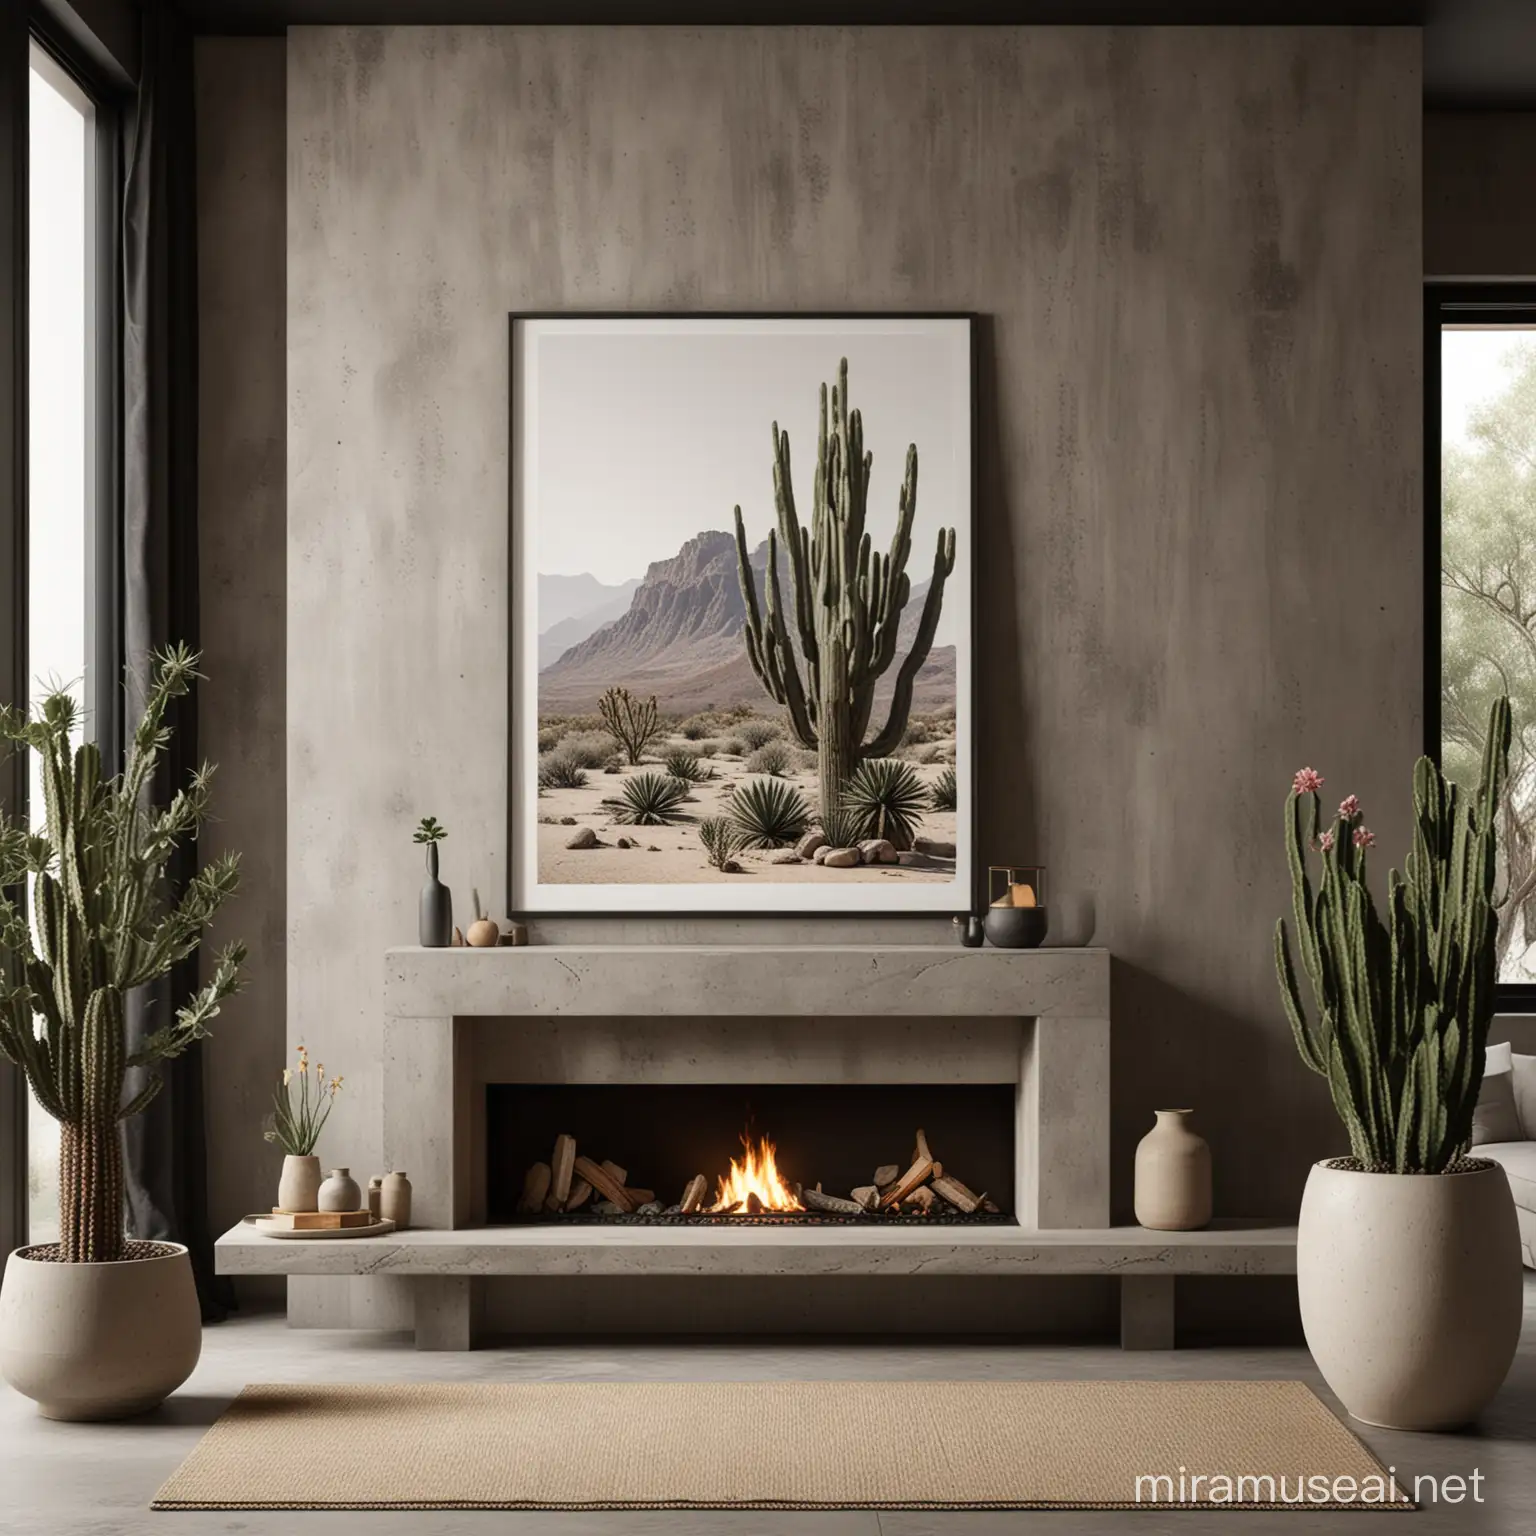 Modern Rustic Interior with Stone Fireplace and Cactus Display